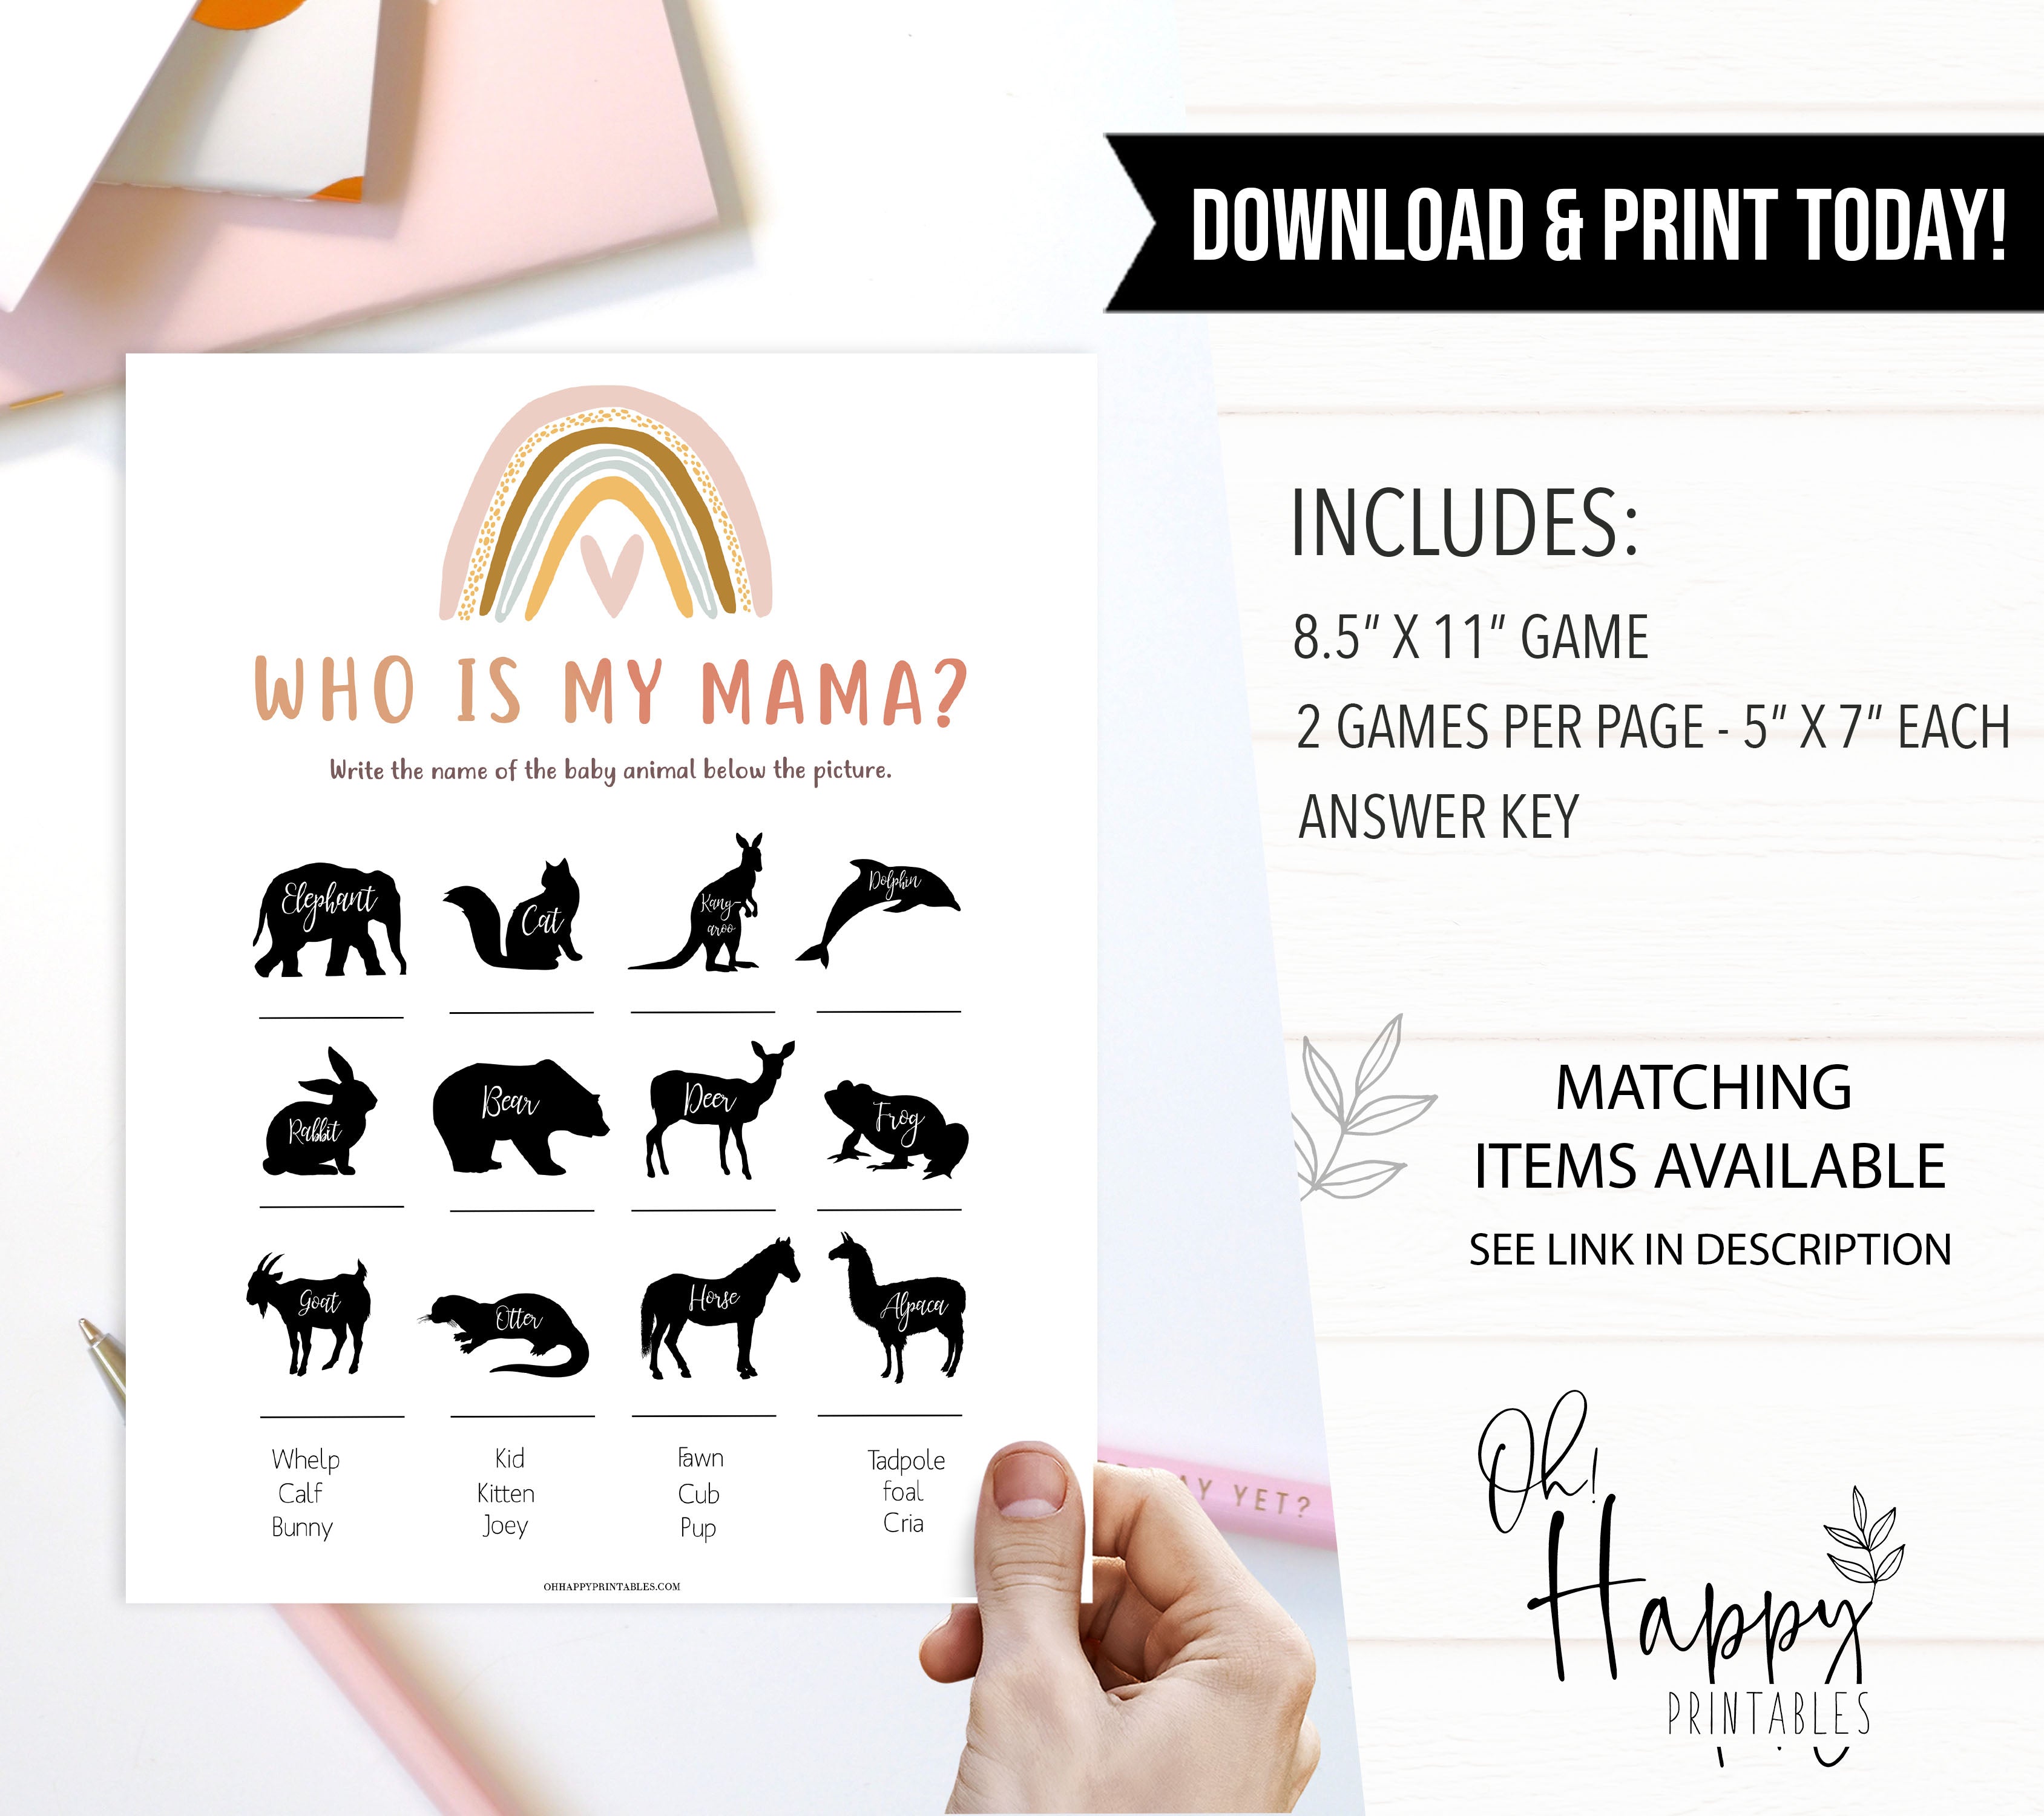 who is my mama baby shower game, Printable baby shower games, boho rainbow baby games, baby shower games, fun baby shower ideas, top baby shower ideas, boho rainbow baby shower, baby shower games, fun boho rainbow baby shower ideas